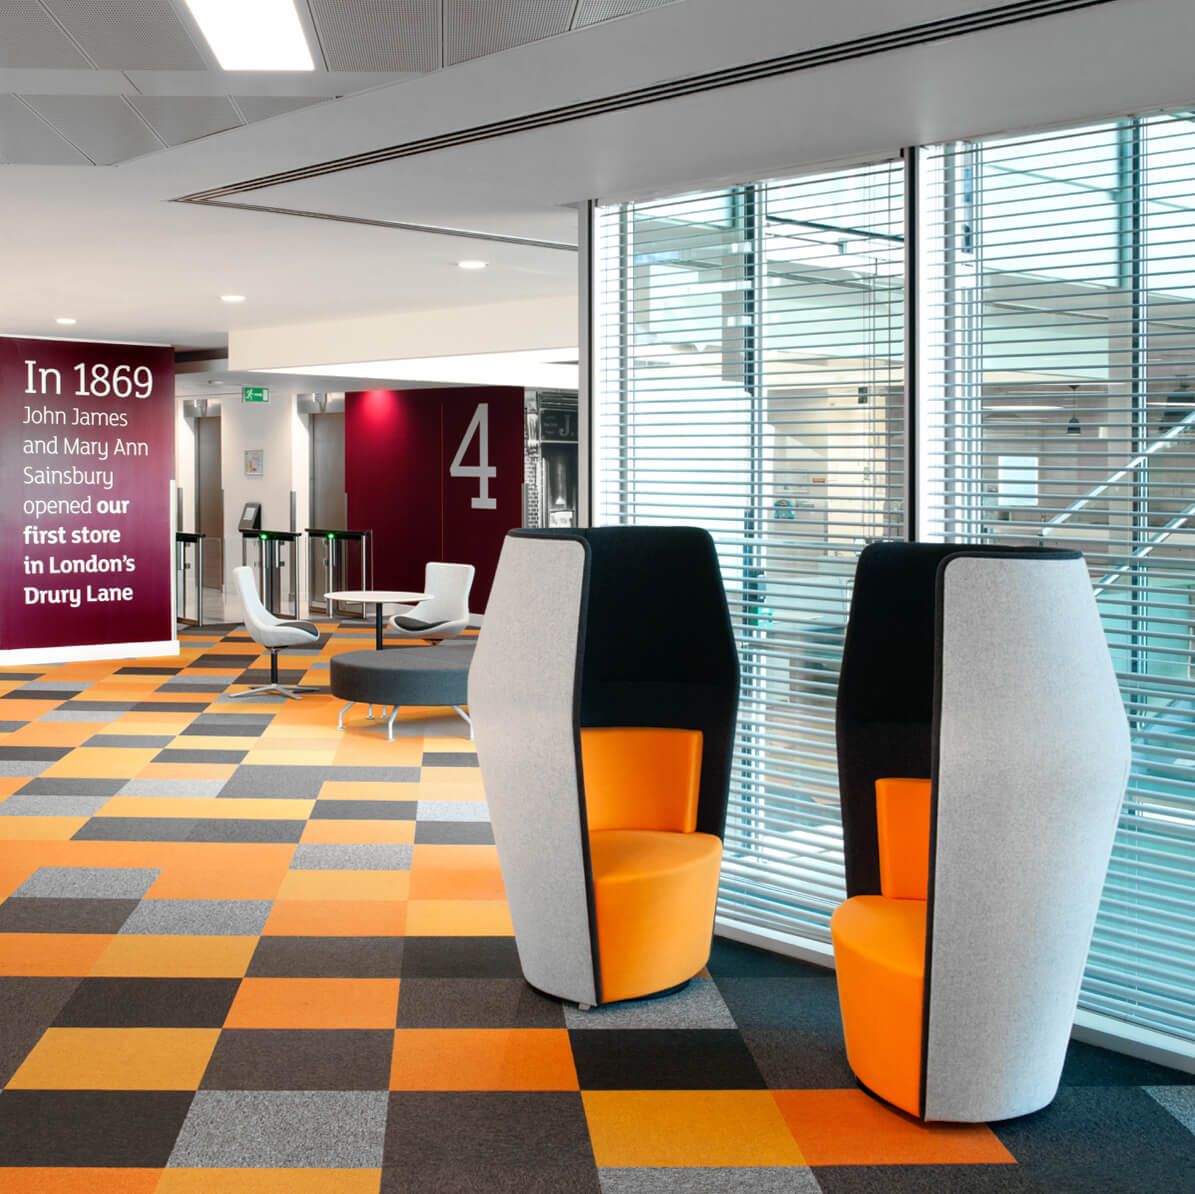  A view of some of the PW design working environments for Sainsbury's